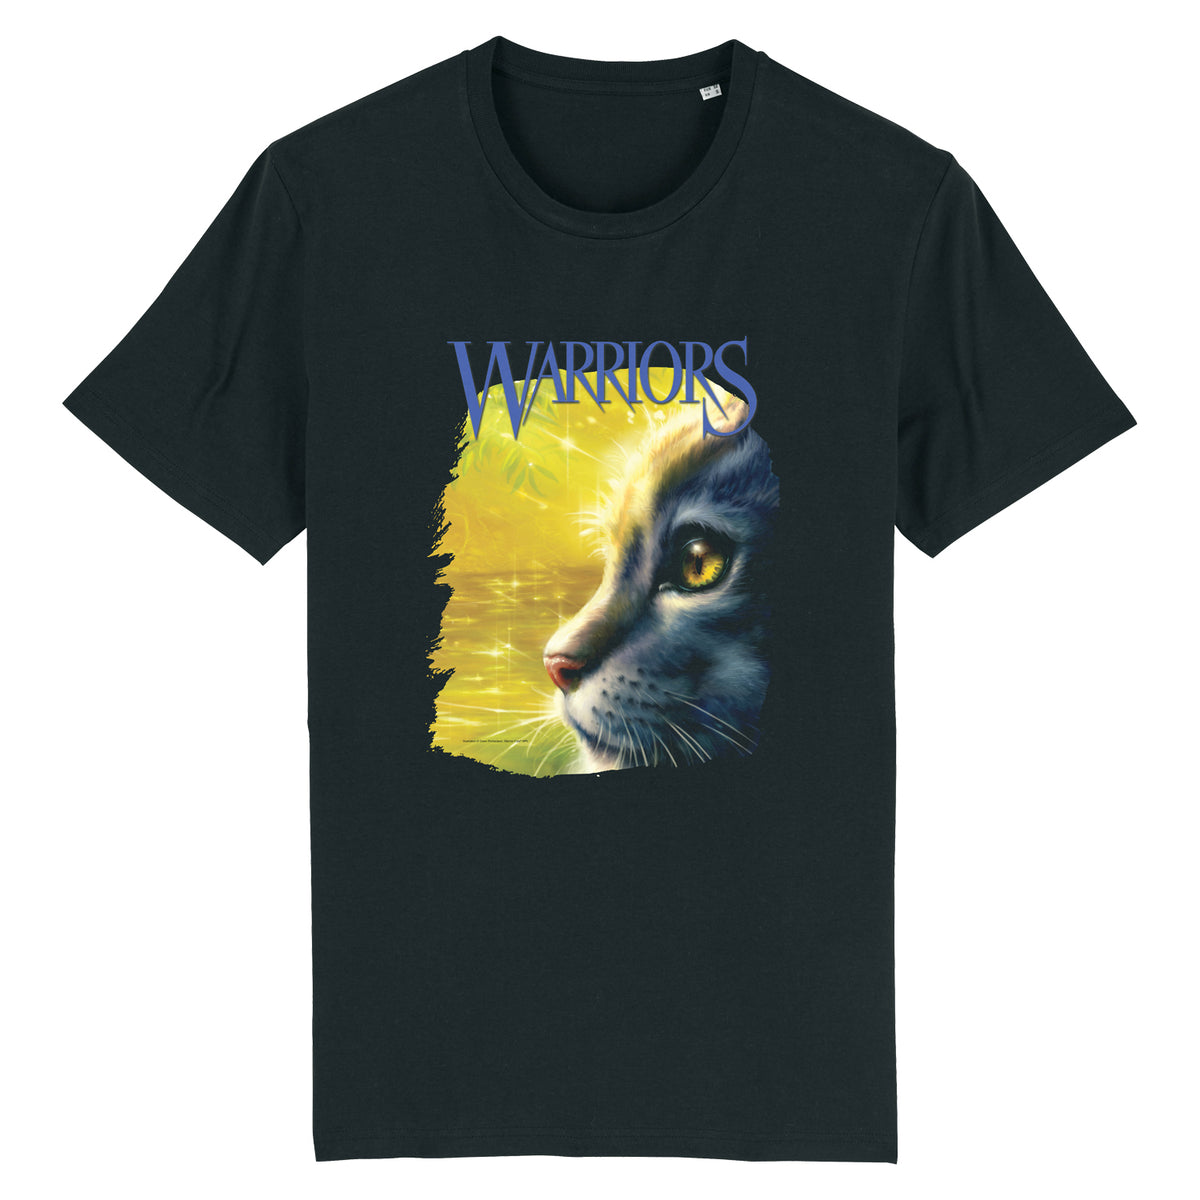 Forest of Secrets - Youth Unisex T-Shirt